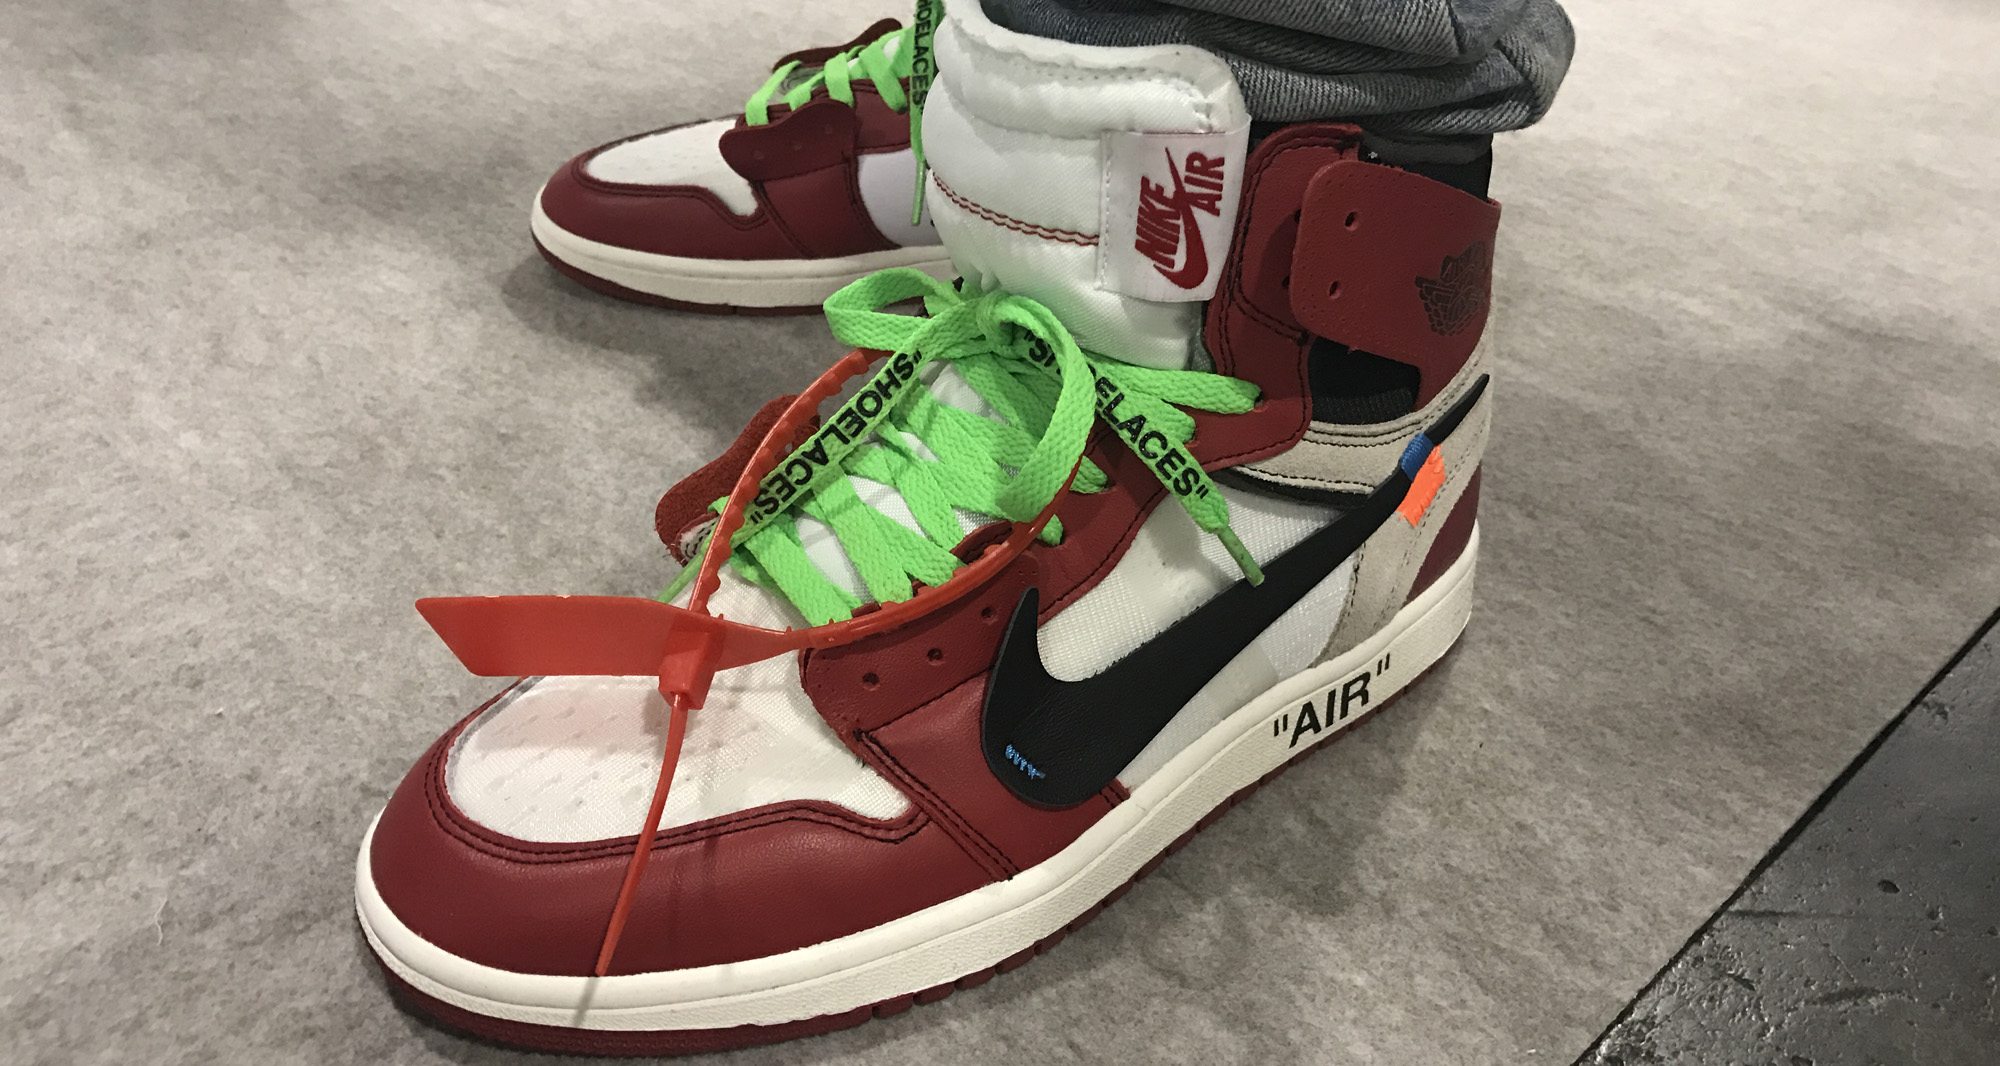 Agenda Report // An On-Foot Look at the Off-White x Air Jordan 1